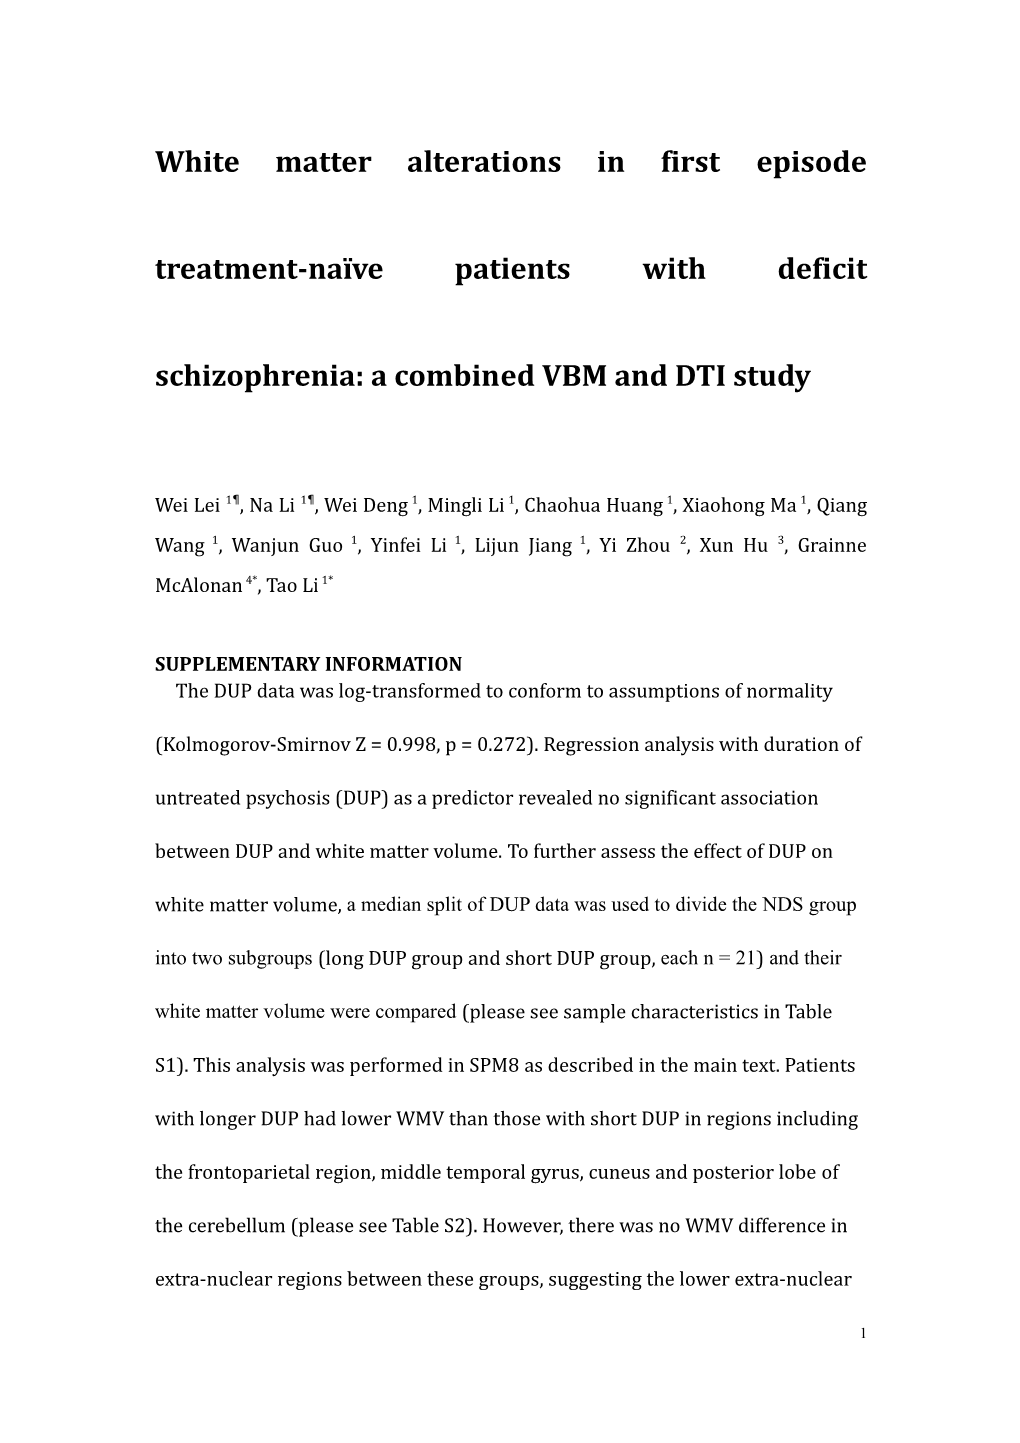 White Matter Alterations in Firstepisode Treatment-Naïve Patients with Deficit Schizophrenia